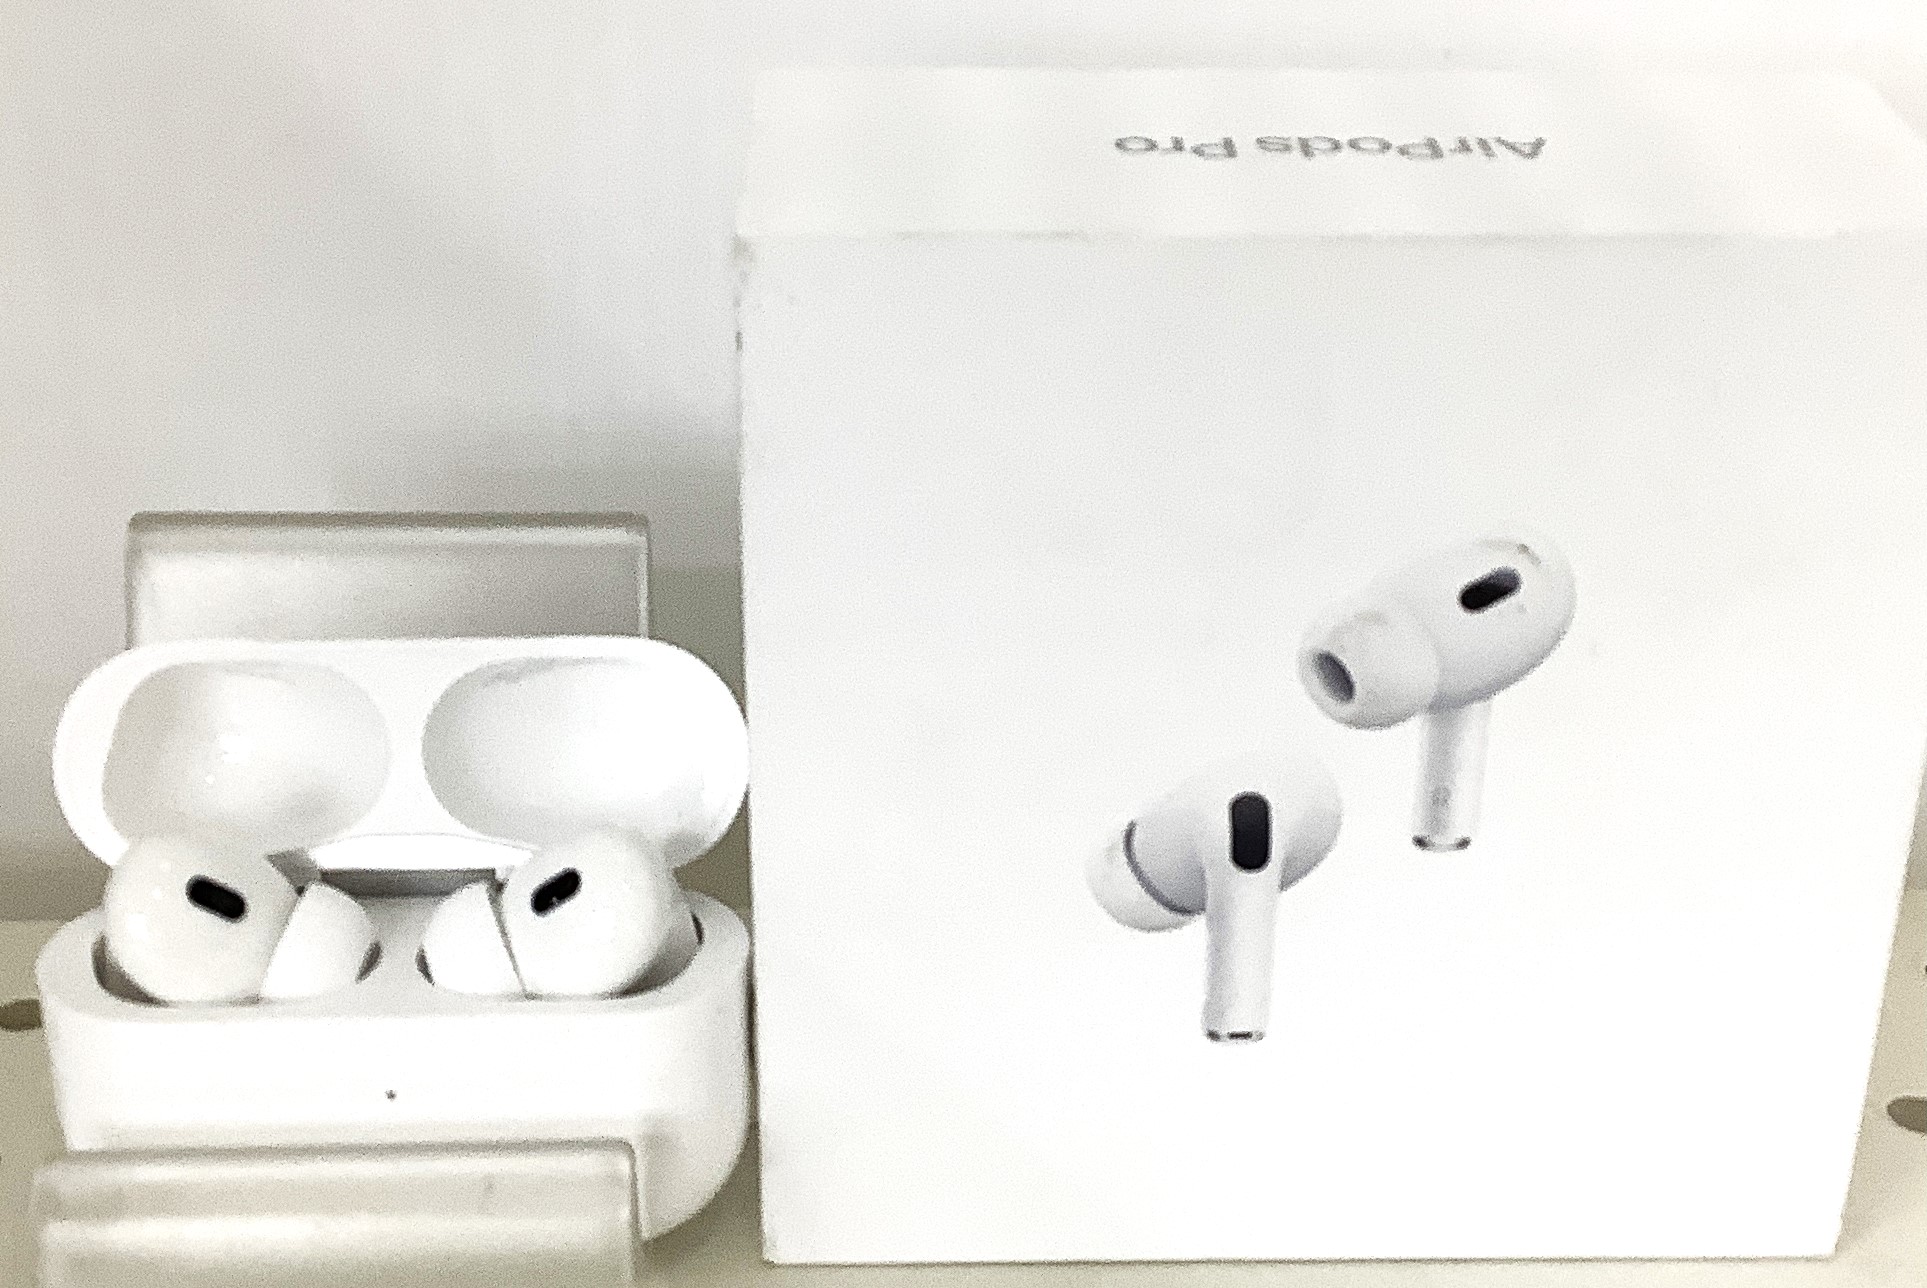 Airpods Pro 買取いたしました！